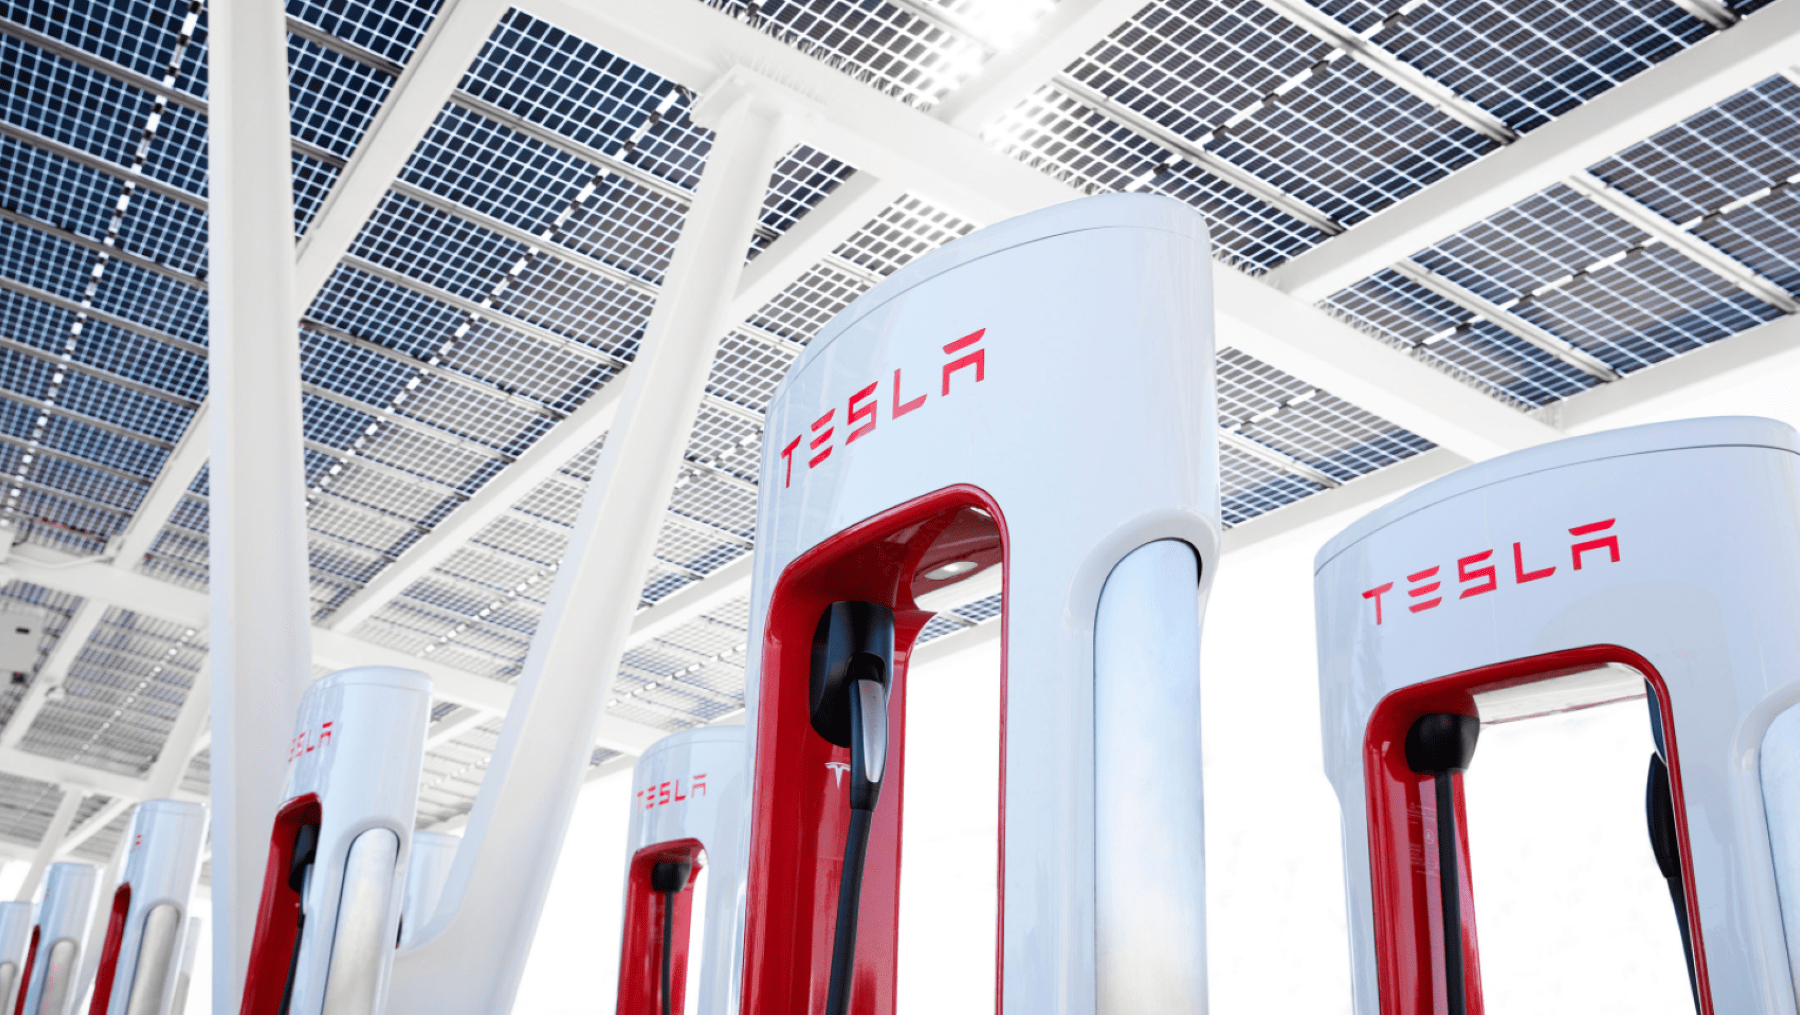 How much does it cost to charge a Tesla at a Tesla Supercharger station?